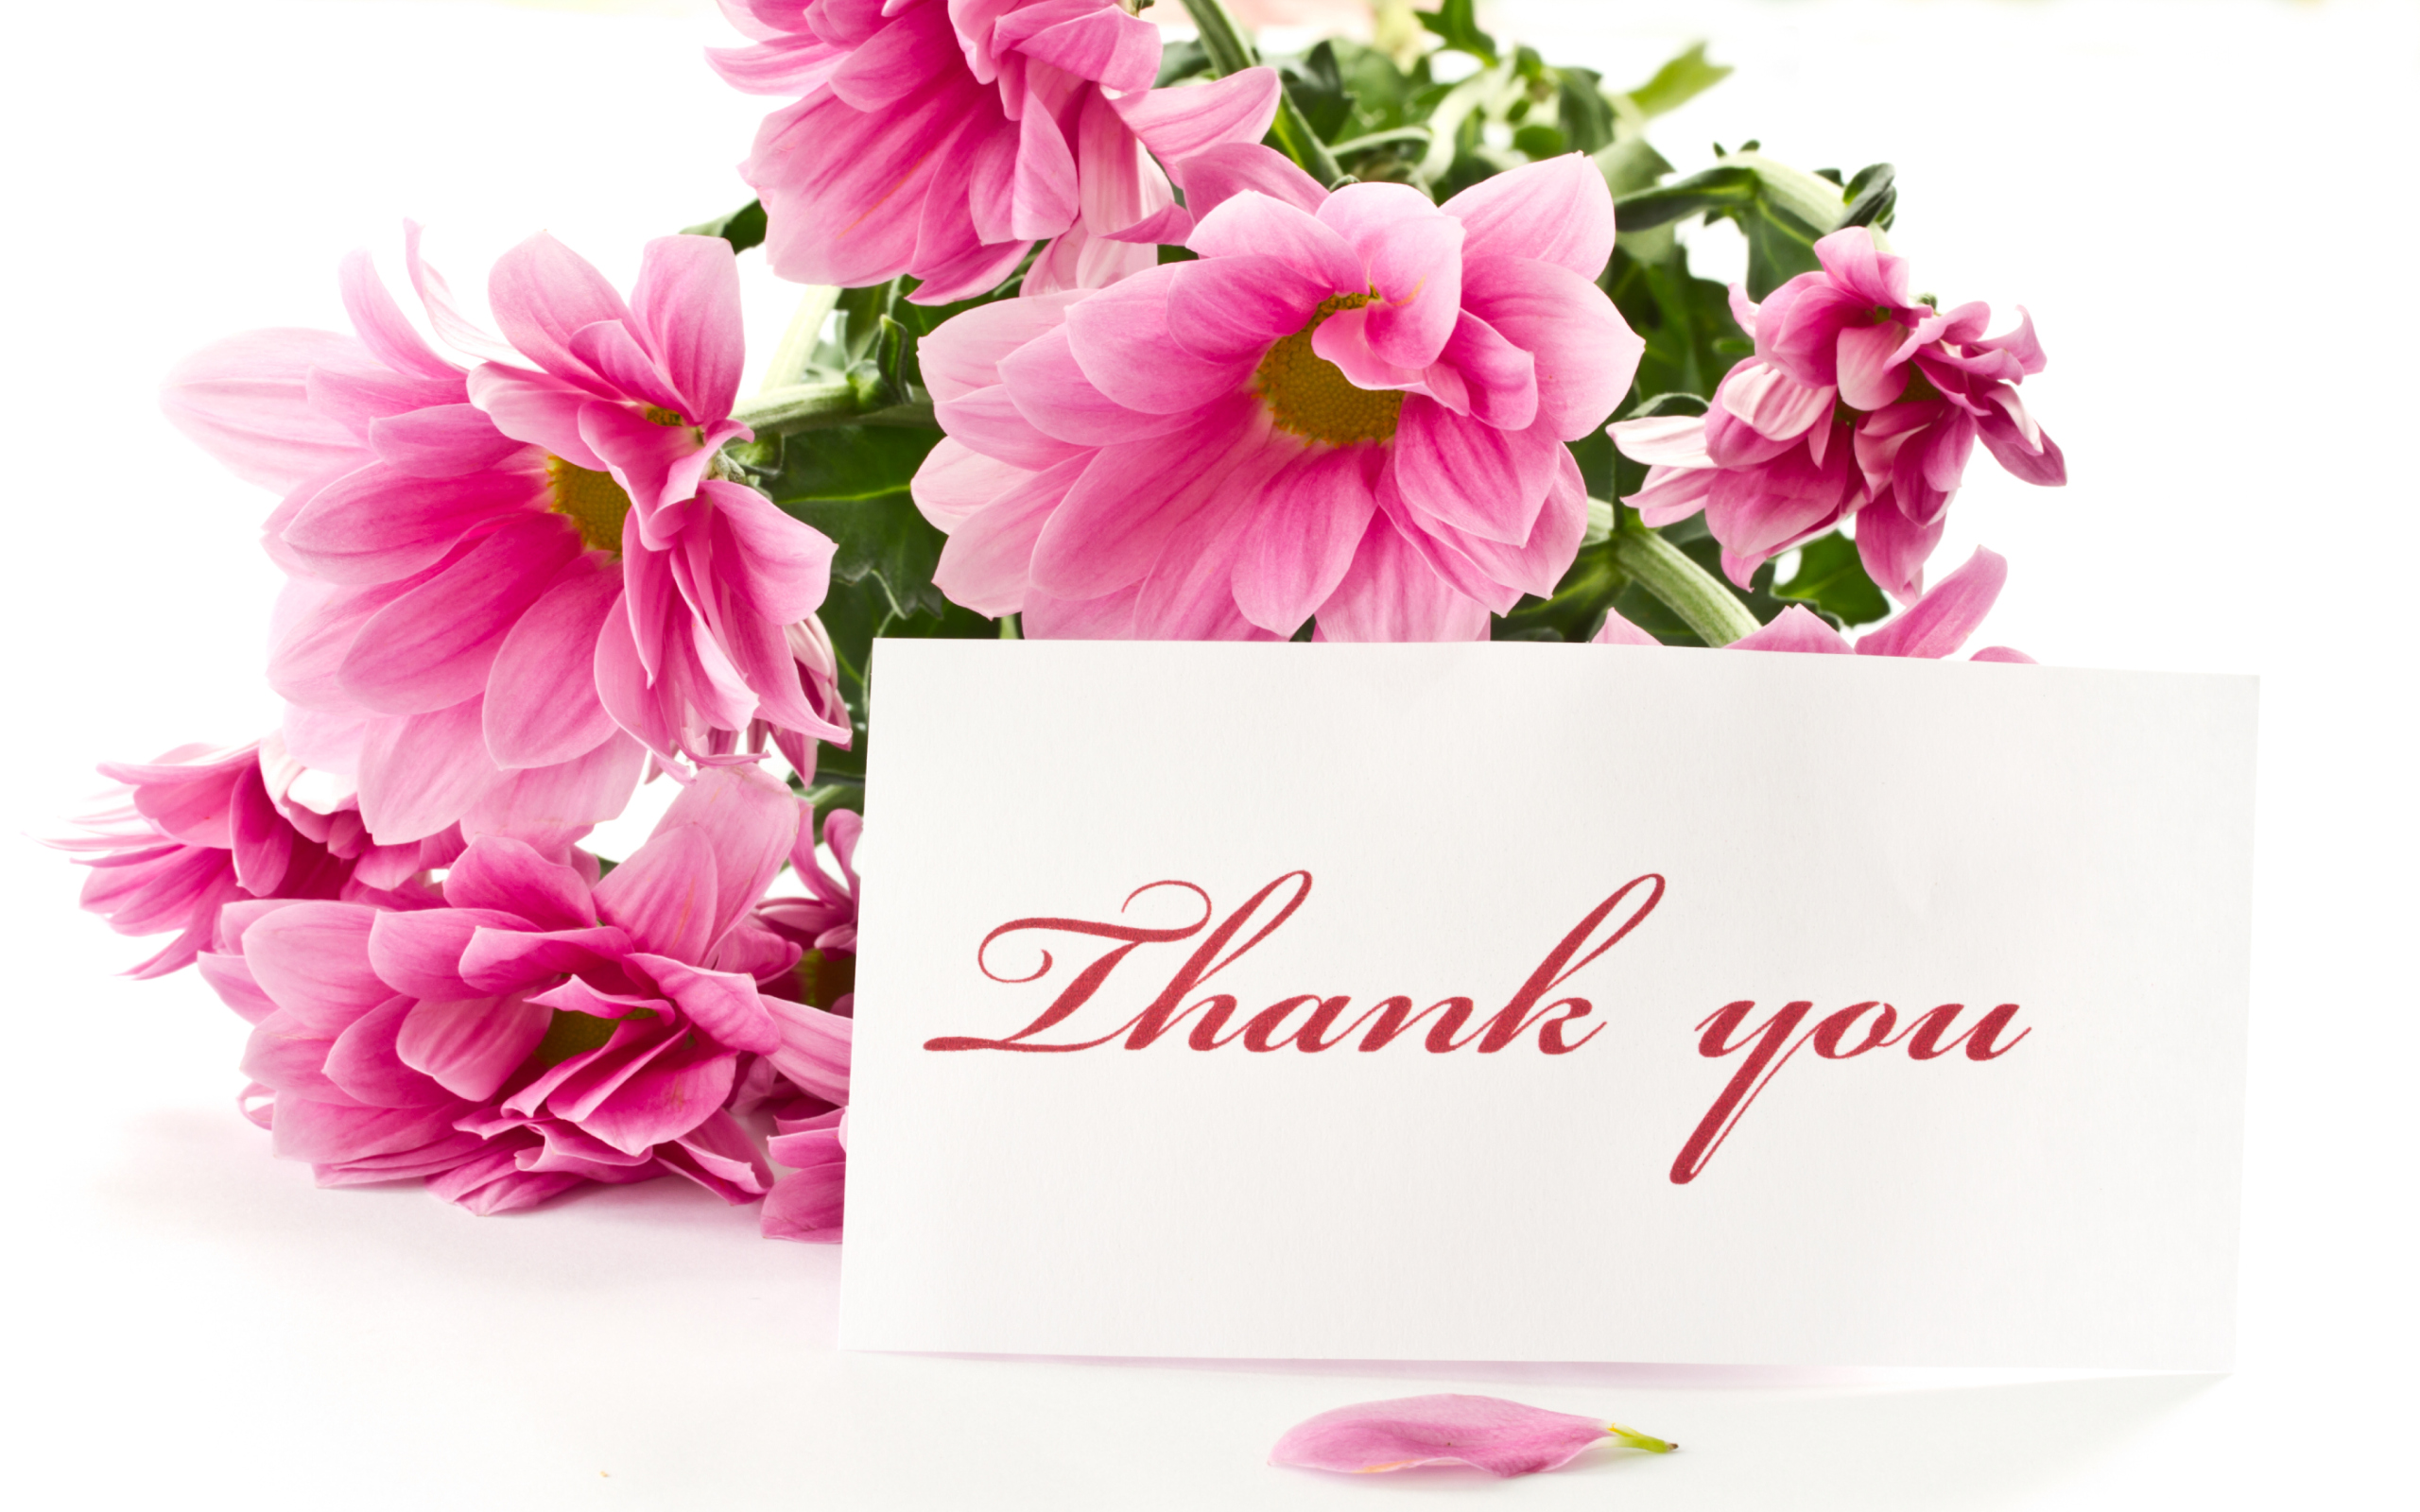 Thank You Wishes With Flower Image